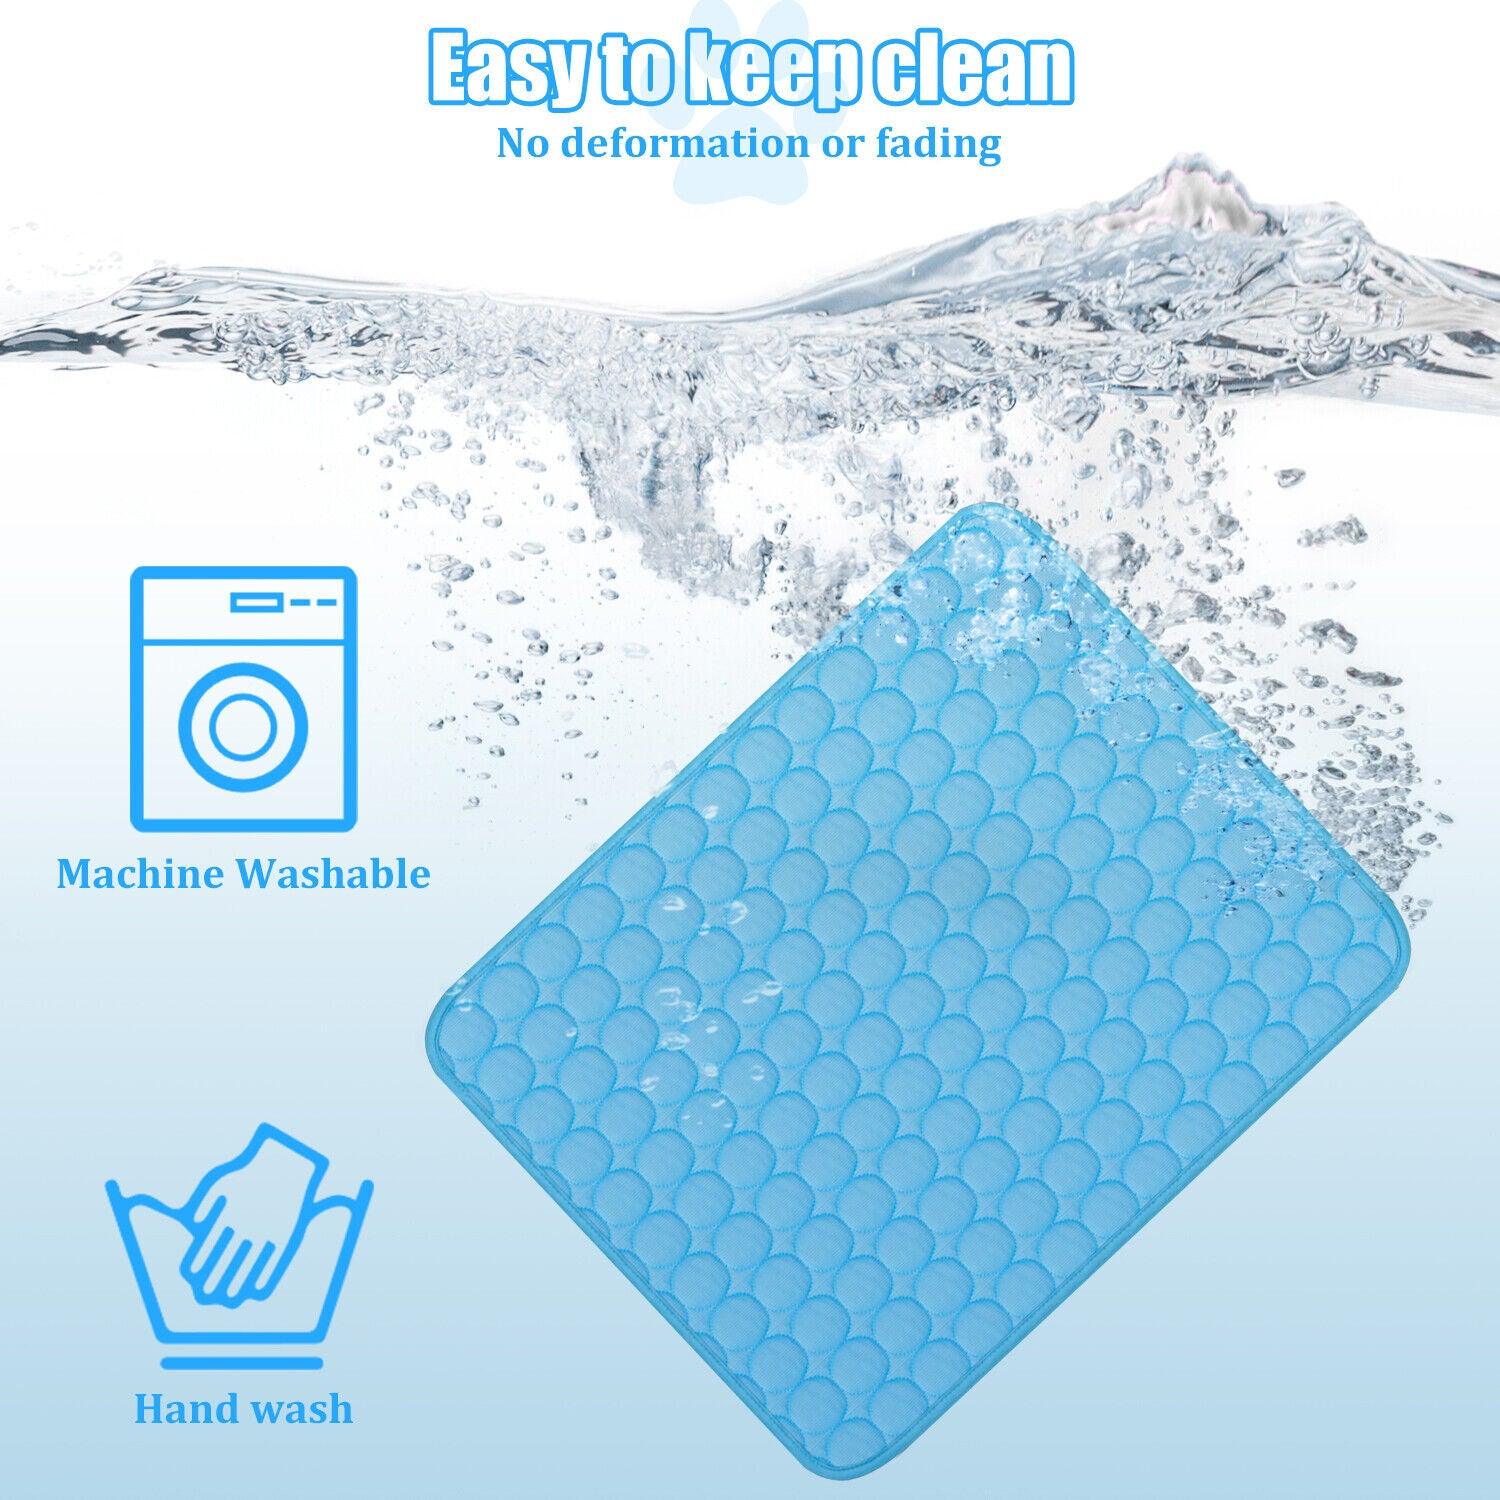 - Cooling Pet Mat Fiercely Southern